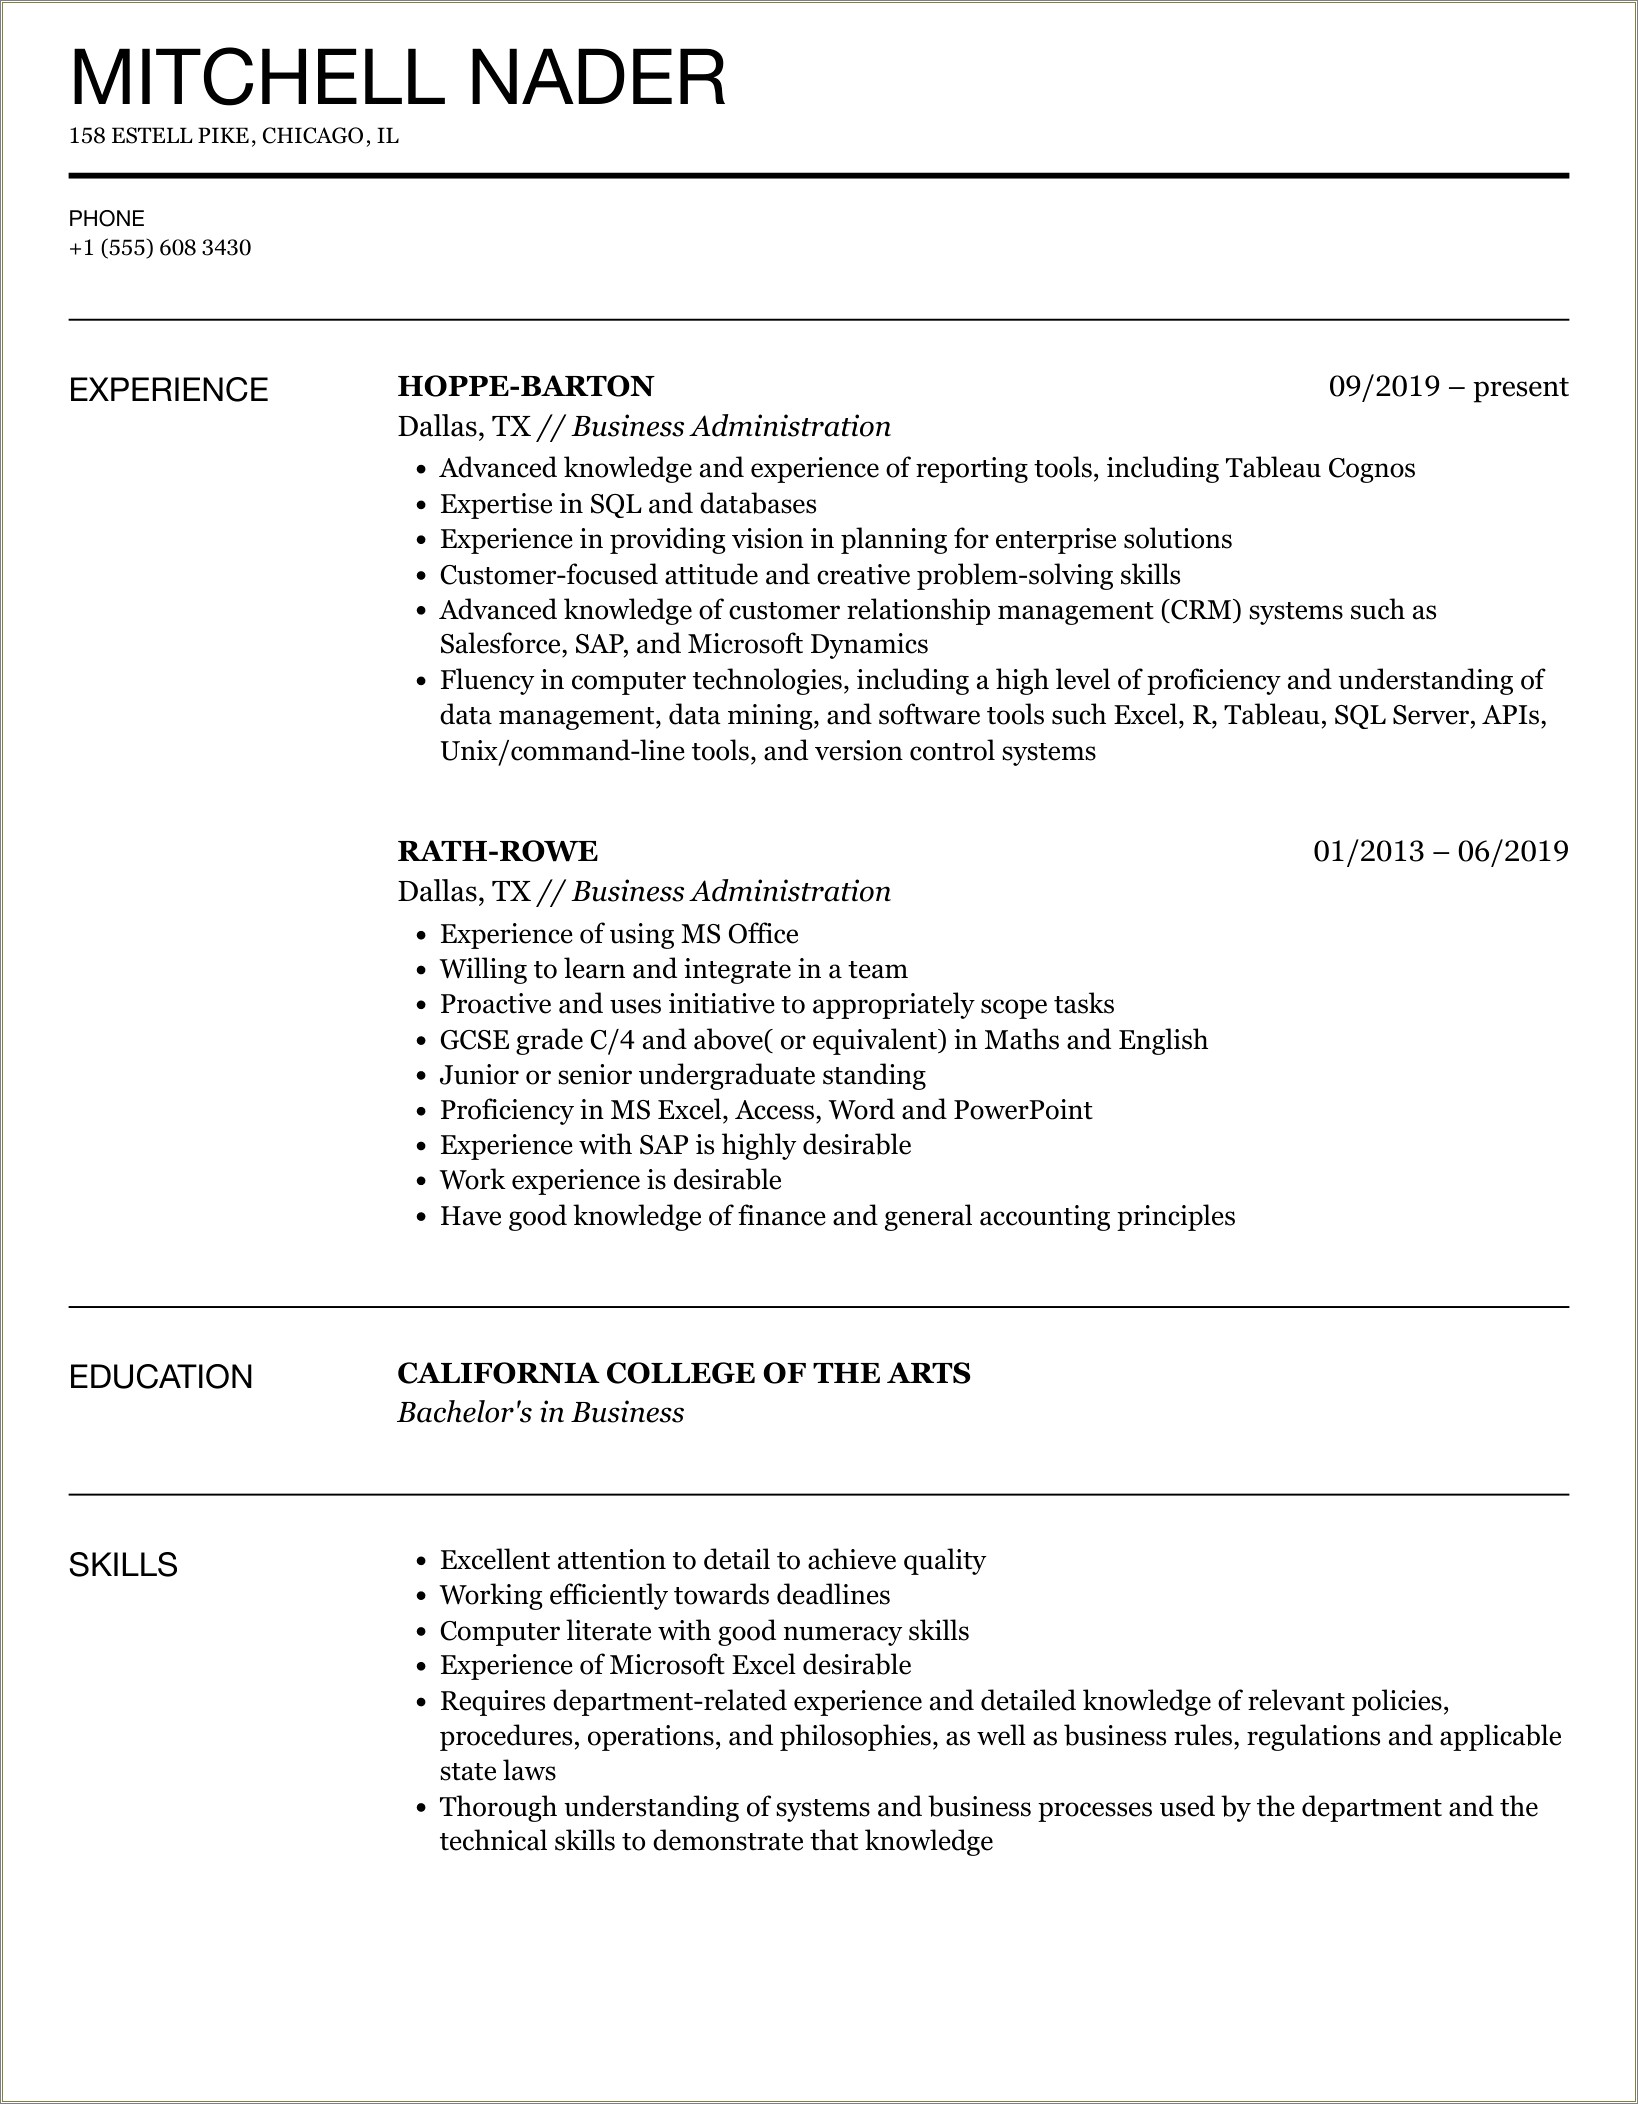 Resume For Fresh Accounting Graduate Without Experience